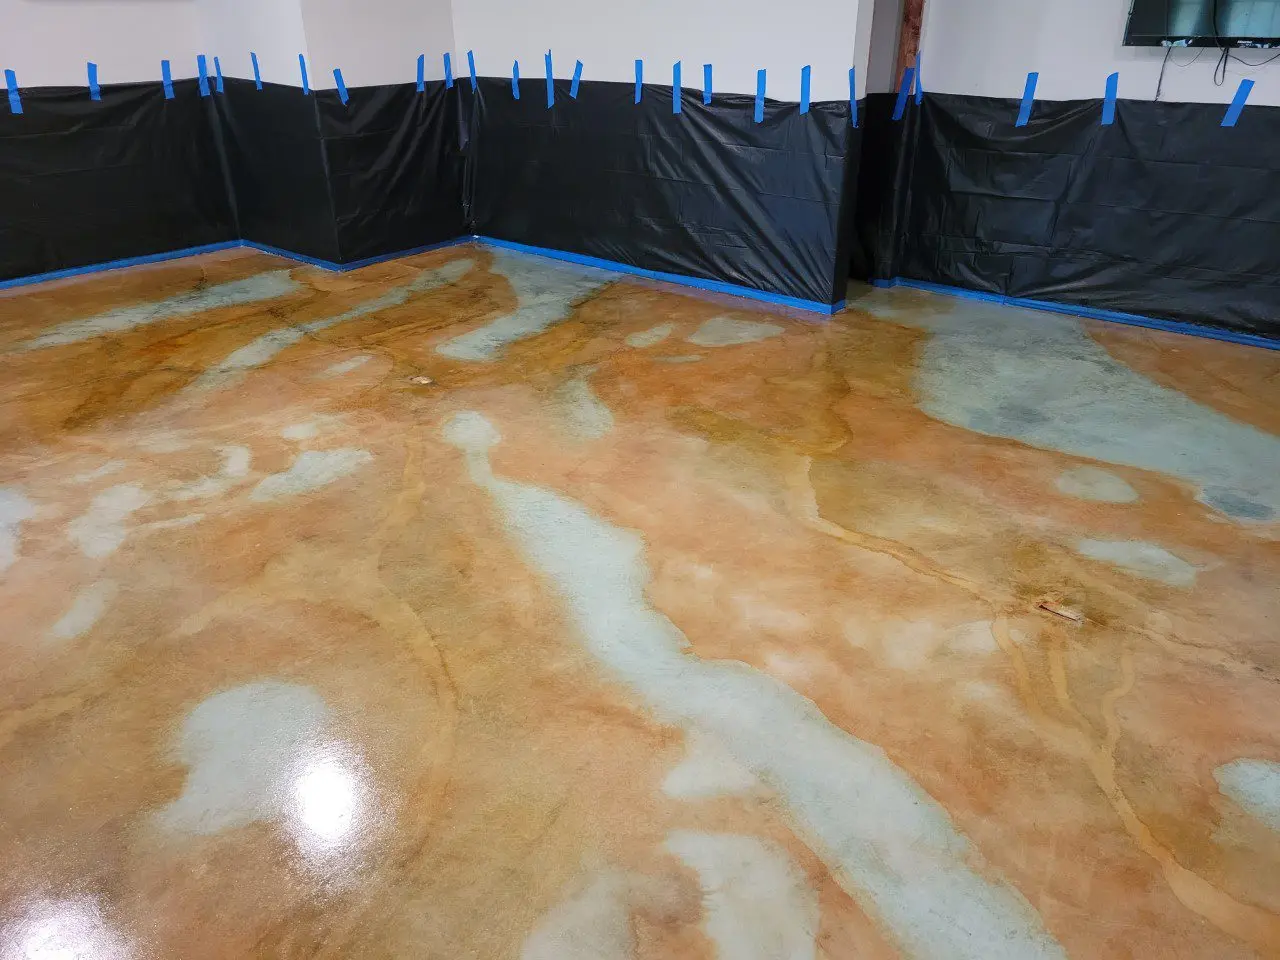 The stained concrete basement floor after application of a clear, glossy sealer enhancing the stain colors